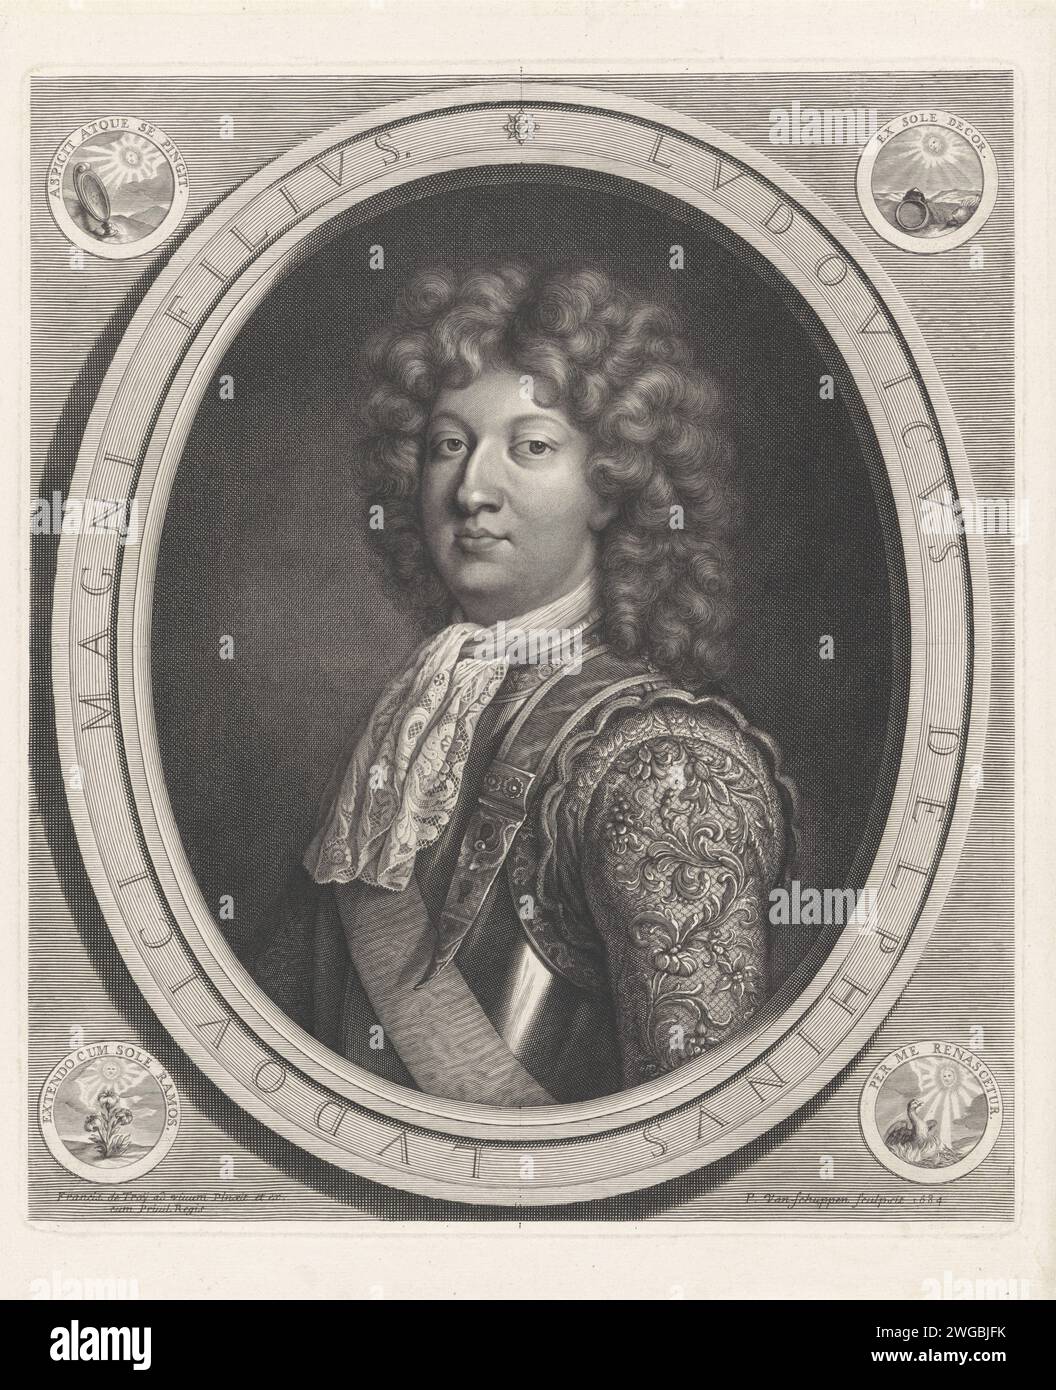 Portrait of Lodewijk, Dauphin van France, Pieter van Schuppen, after François de Troy, 1684 print Portrait of Lodewijk, Dauphin van France in an oval random frame with his name on it. In the four corners an emblem with Latin poetry lines.  paper engraving Stock Photo